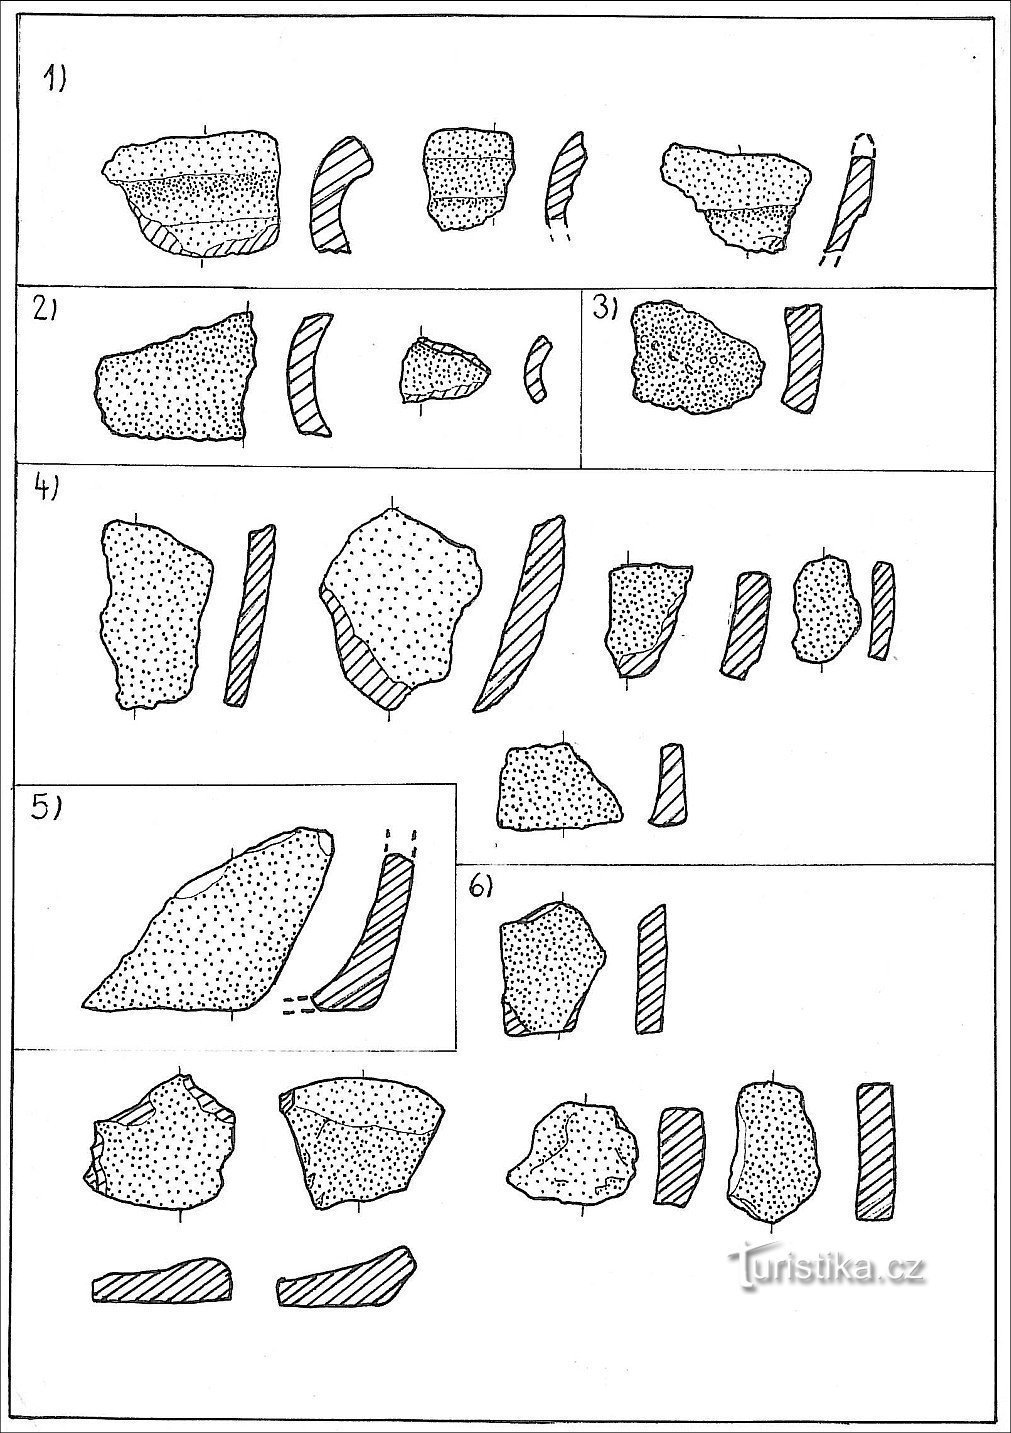 examples of hillfort ceramics; 1) edges, 2) throats, 3) shoulders, 4) body, 5) base, 6) bottoms